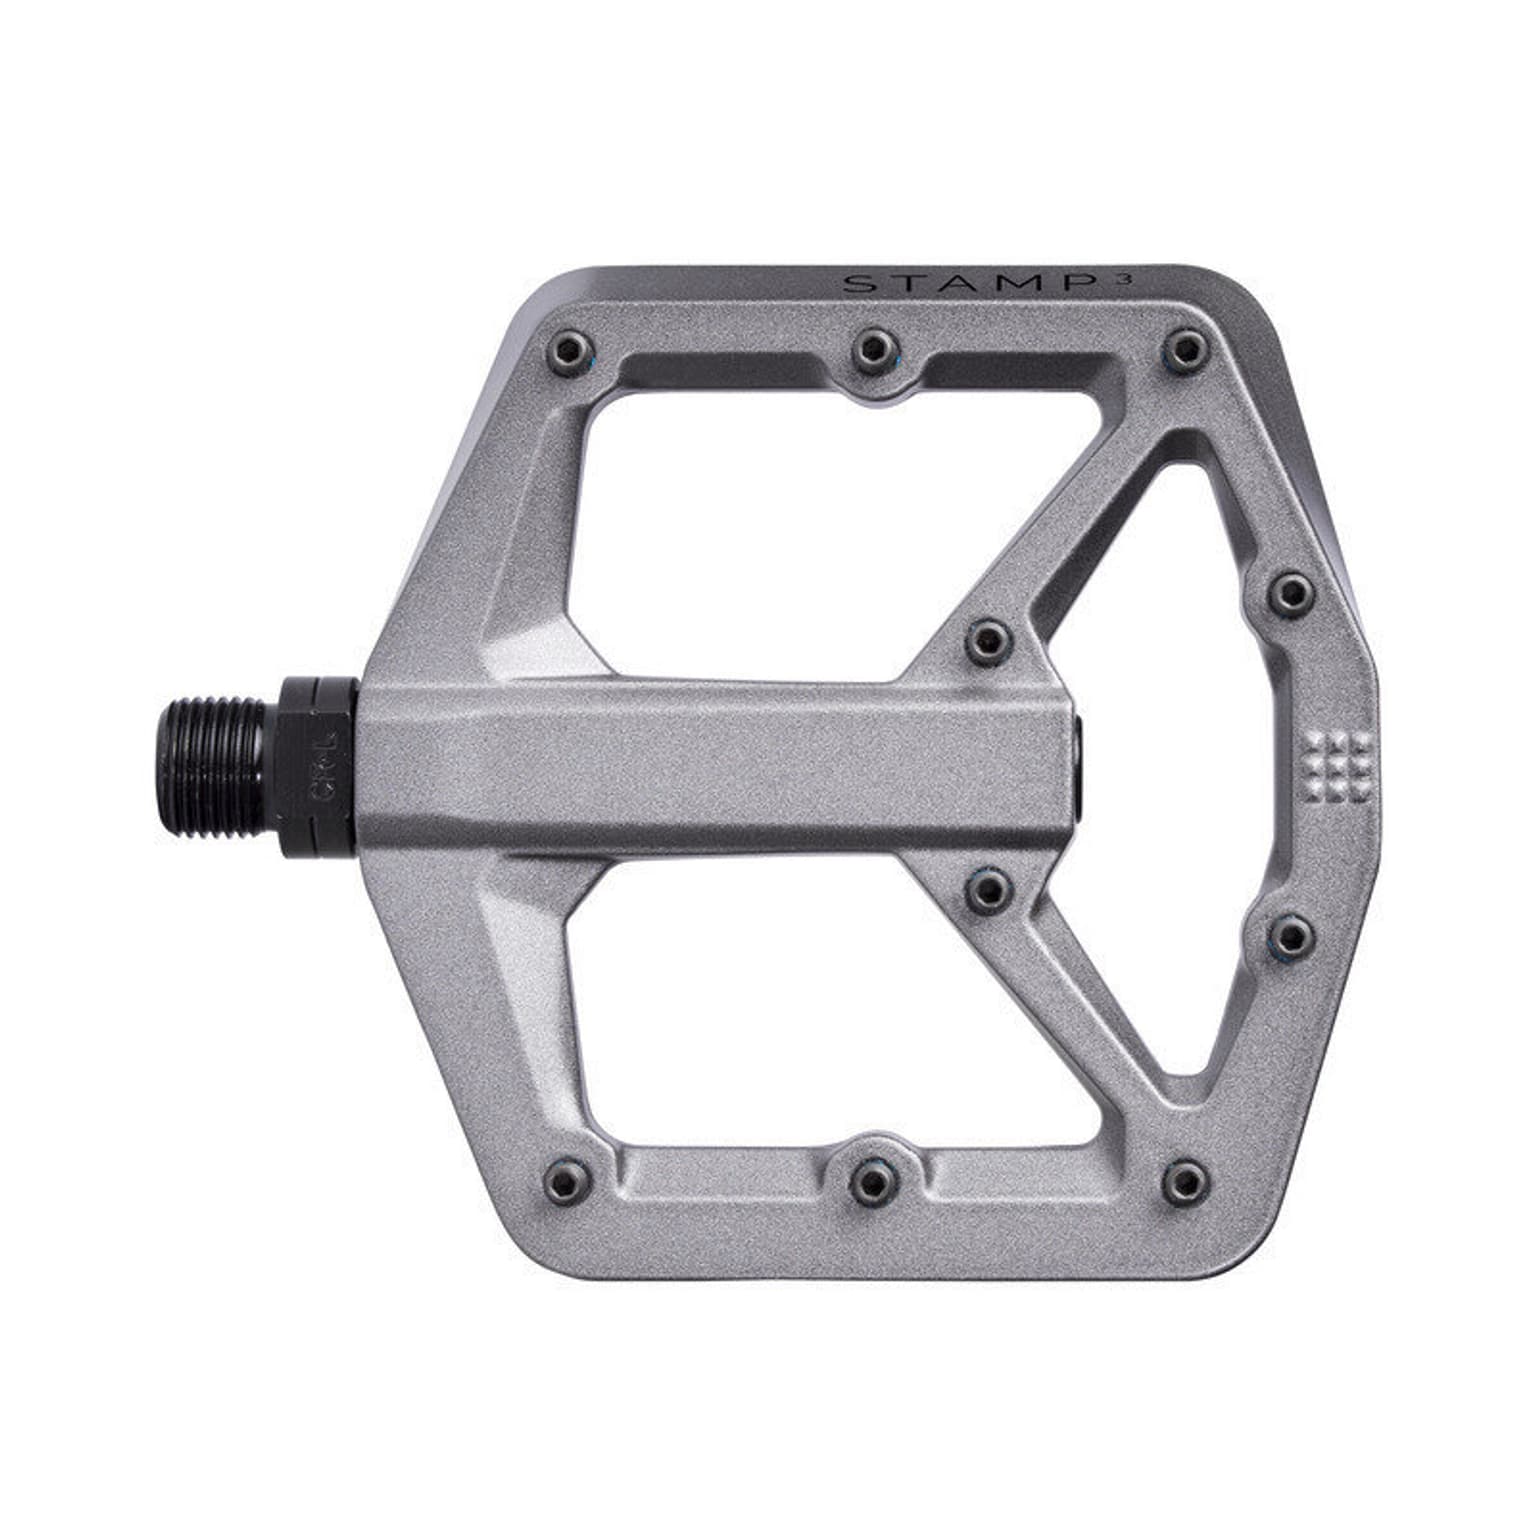 crankbrothers crankbrothers Pedal Stamp 3 small Pedale 1